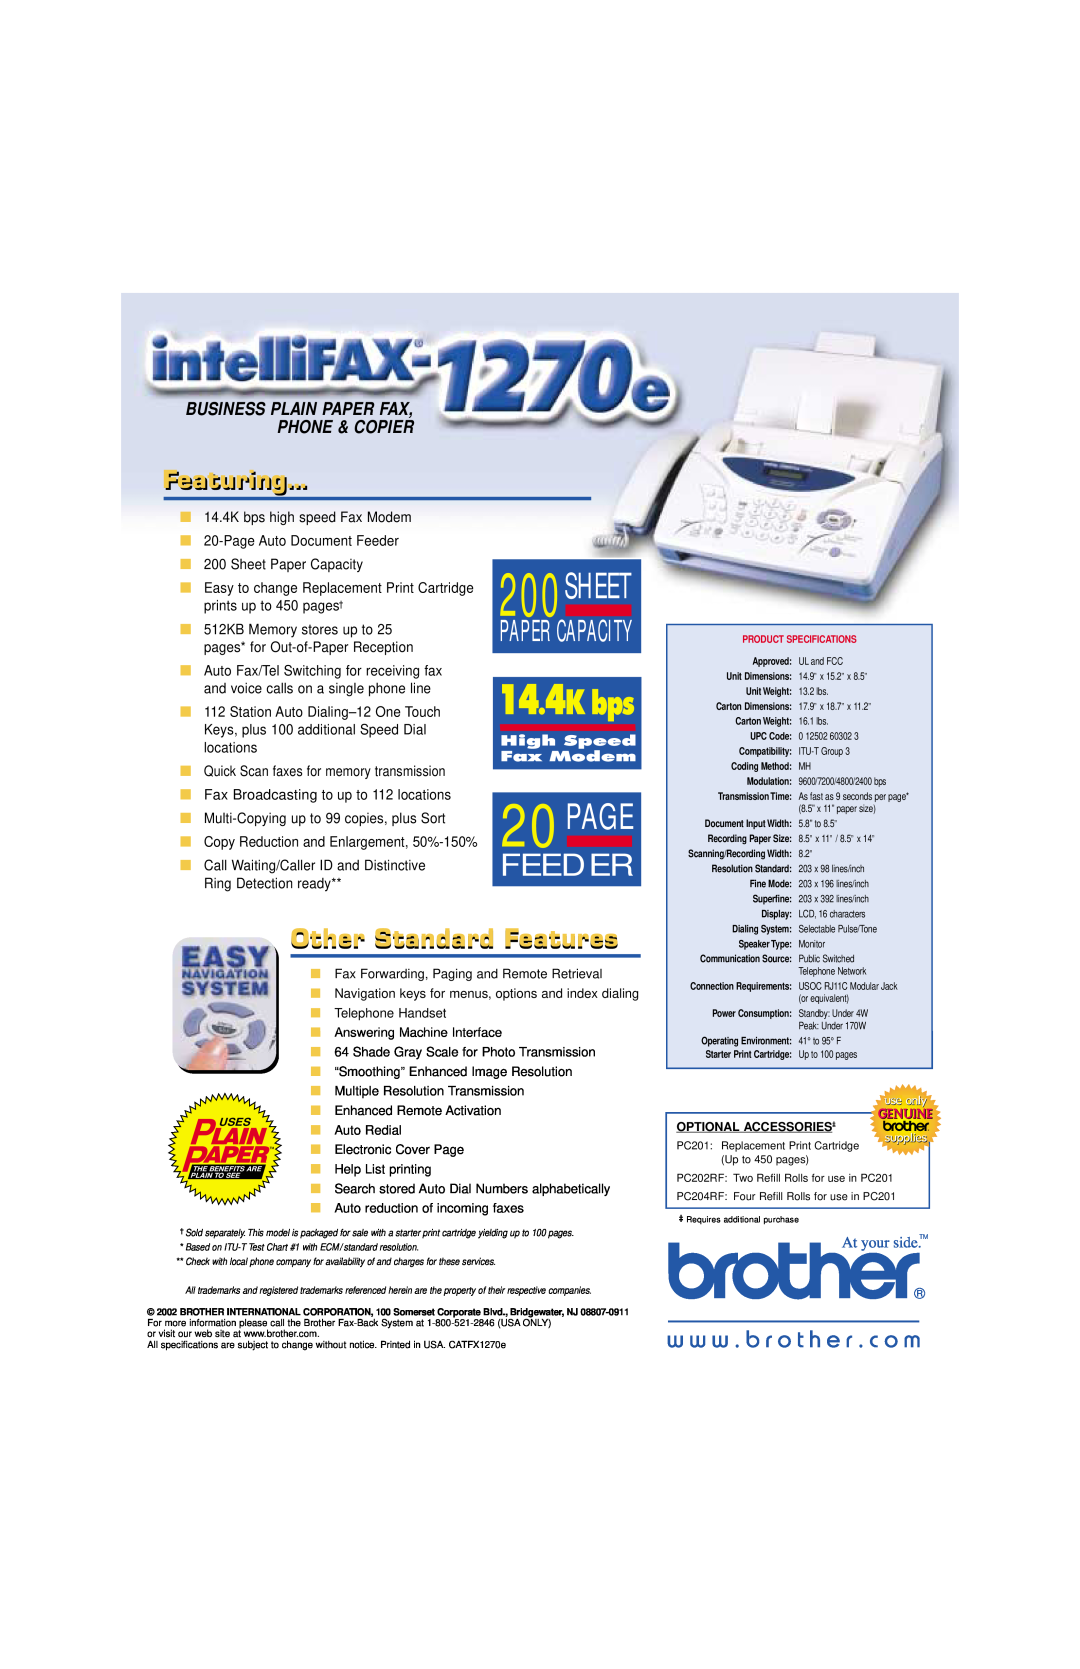 Brother 1270e manual Featuring, Other Standard Features, 20PAGE, Feeder, Sheet, Business Plain Paper Fax Phone & Copier 